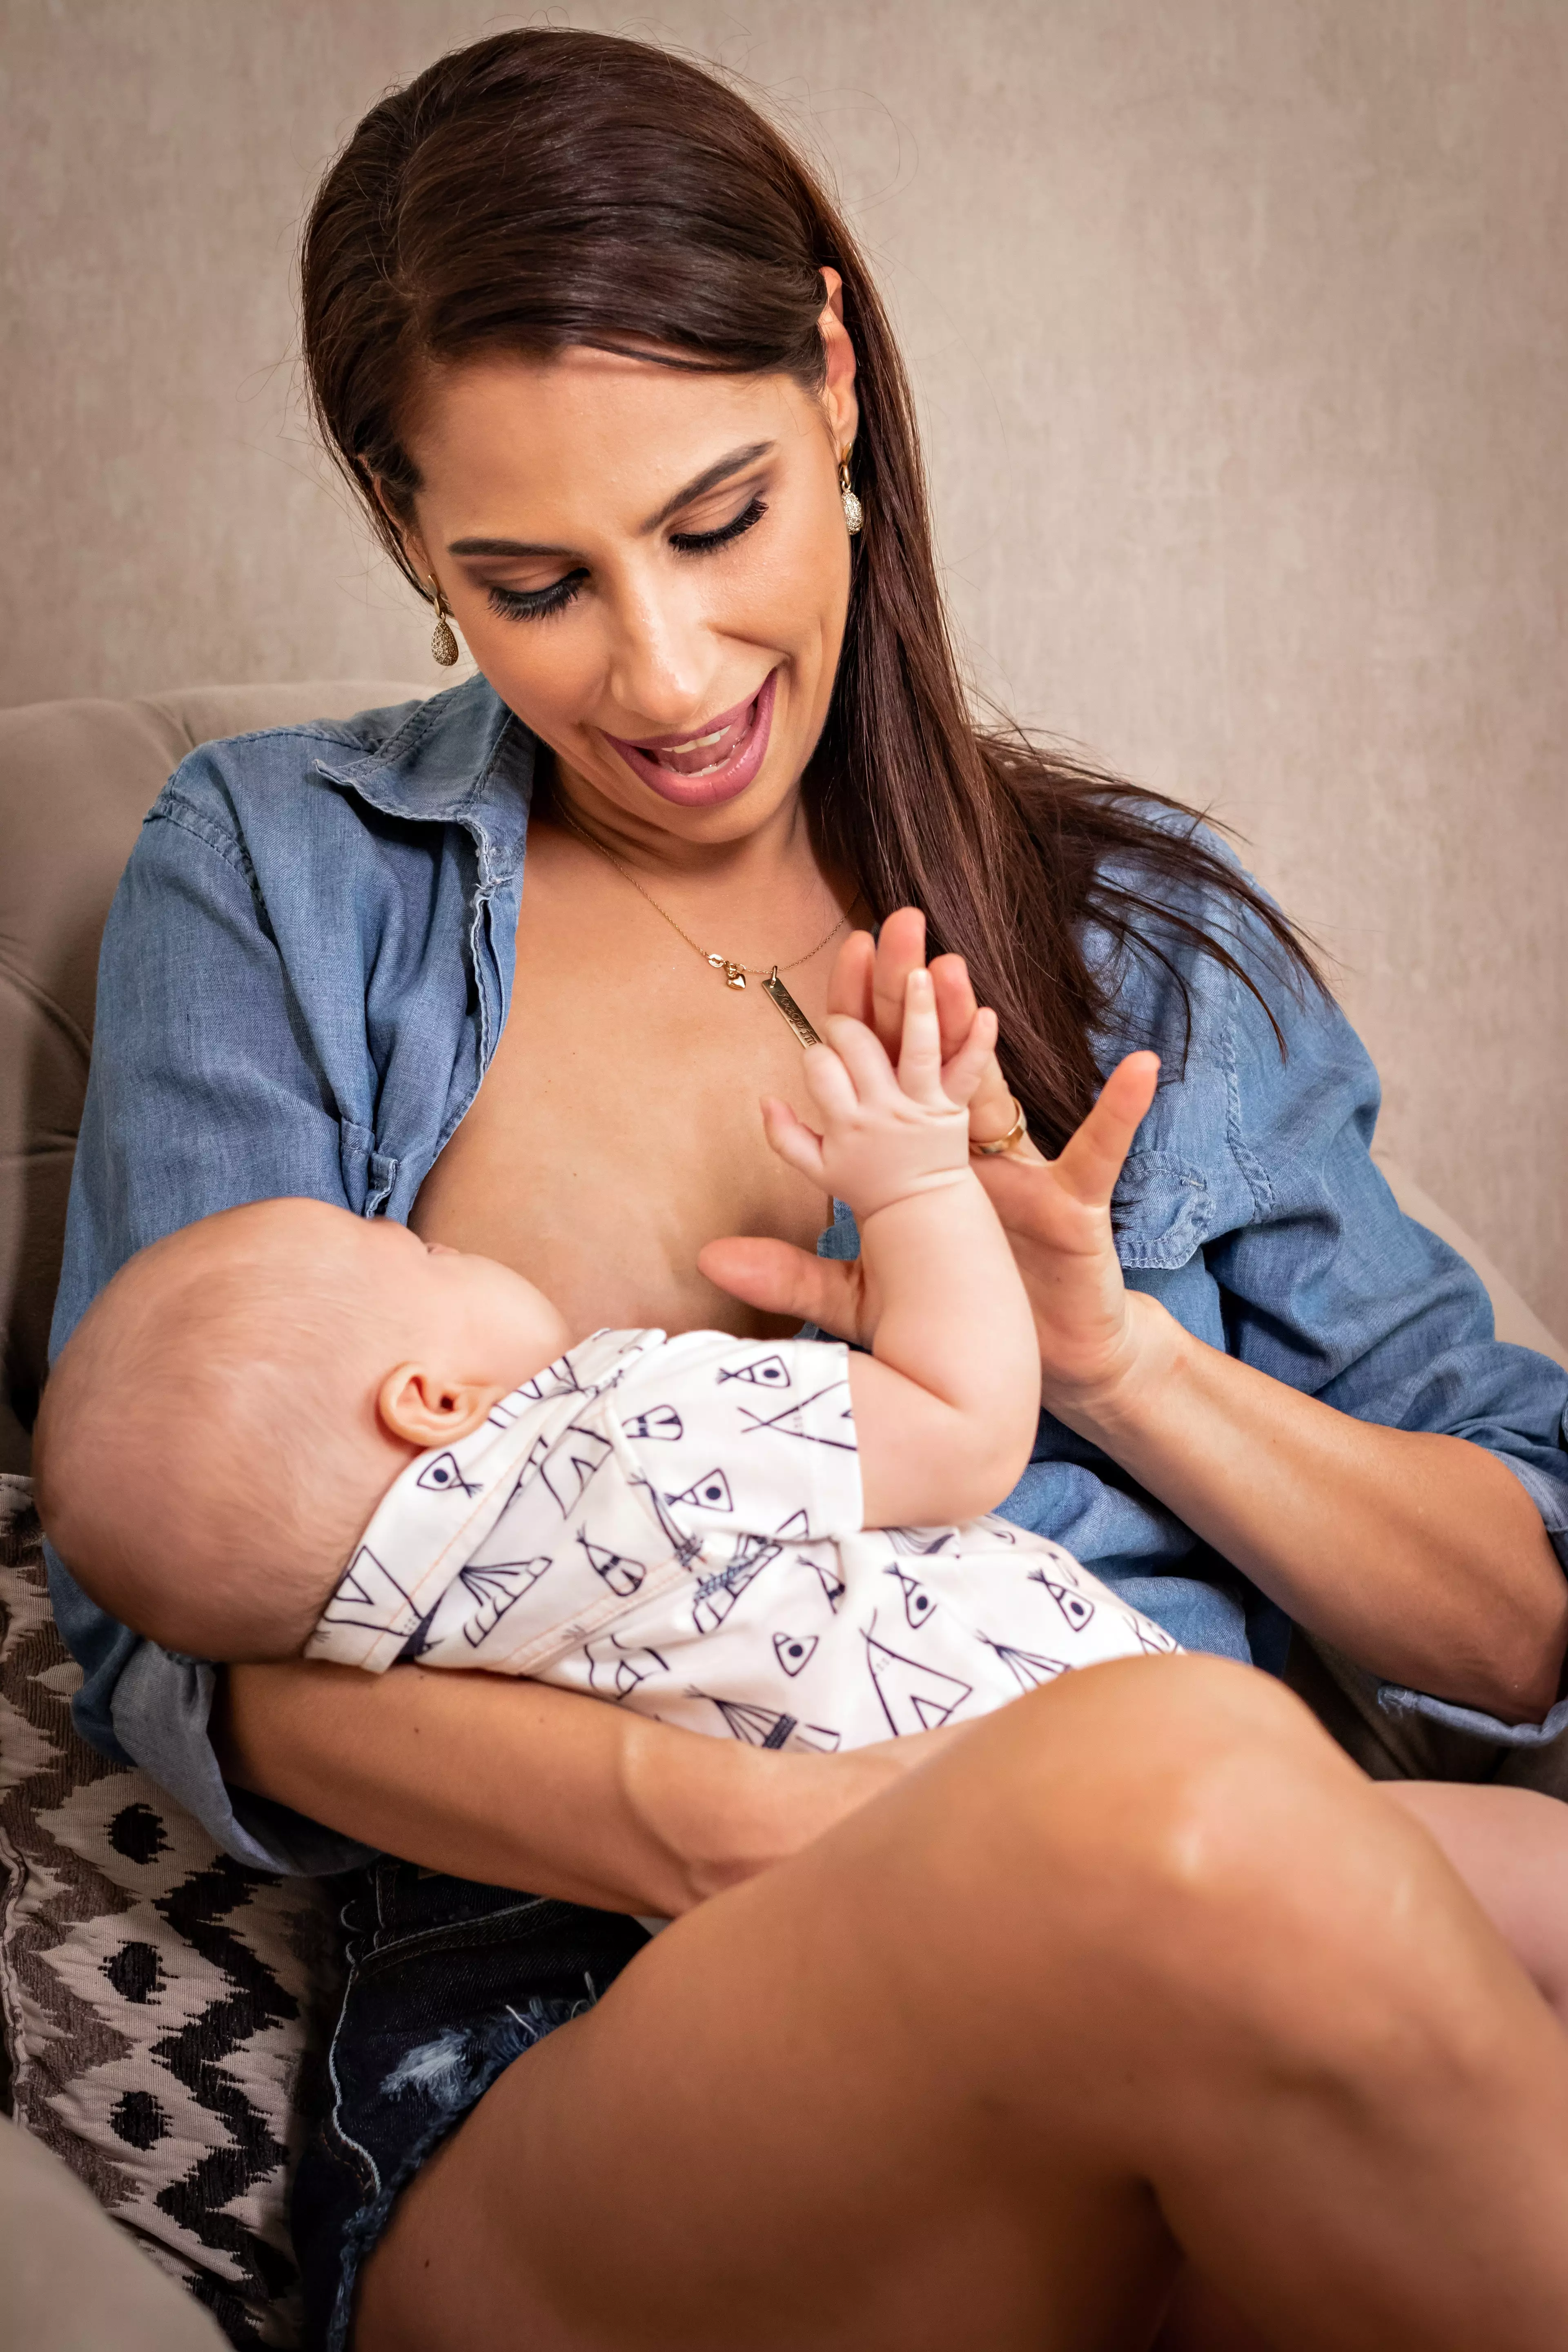 Breastfeeding is a struggle for some (